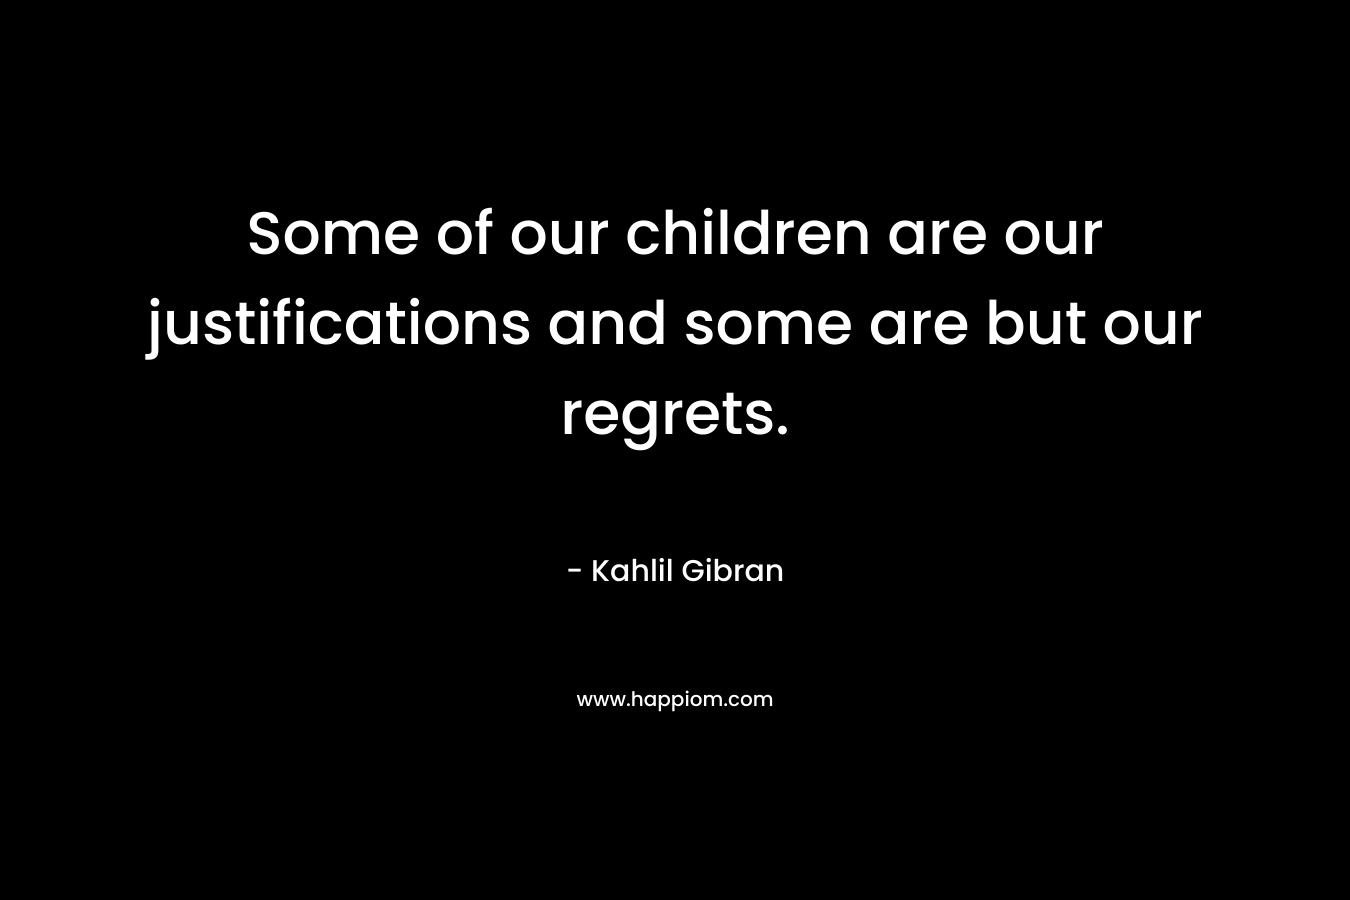 Some of our children are our justifications and some are but our regrets.